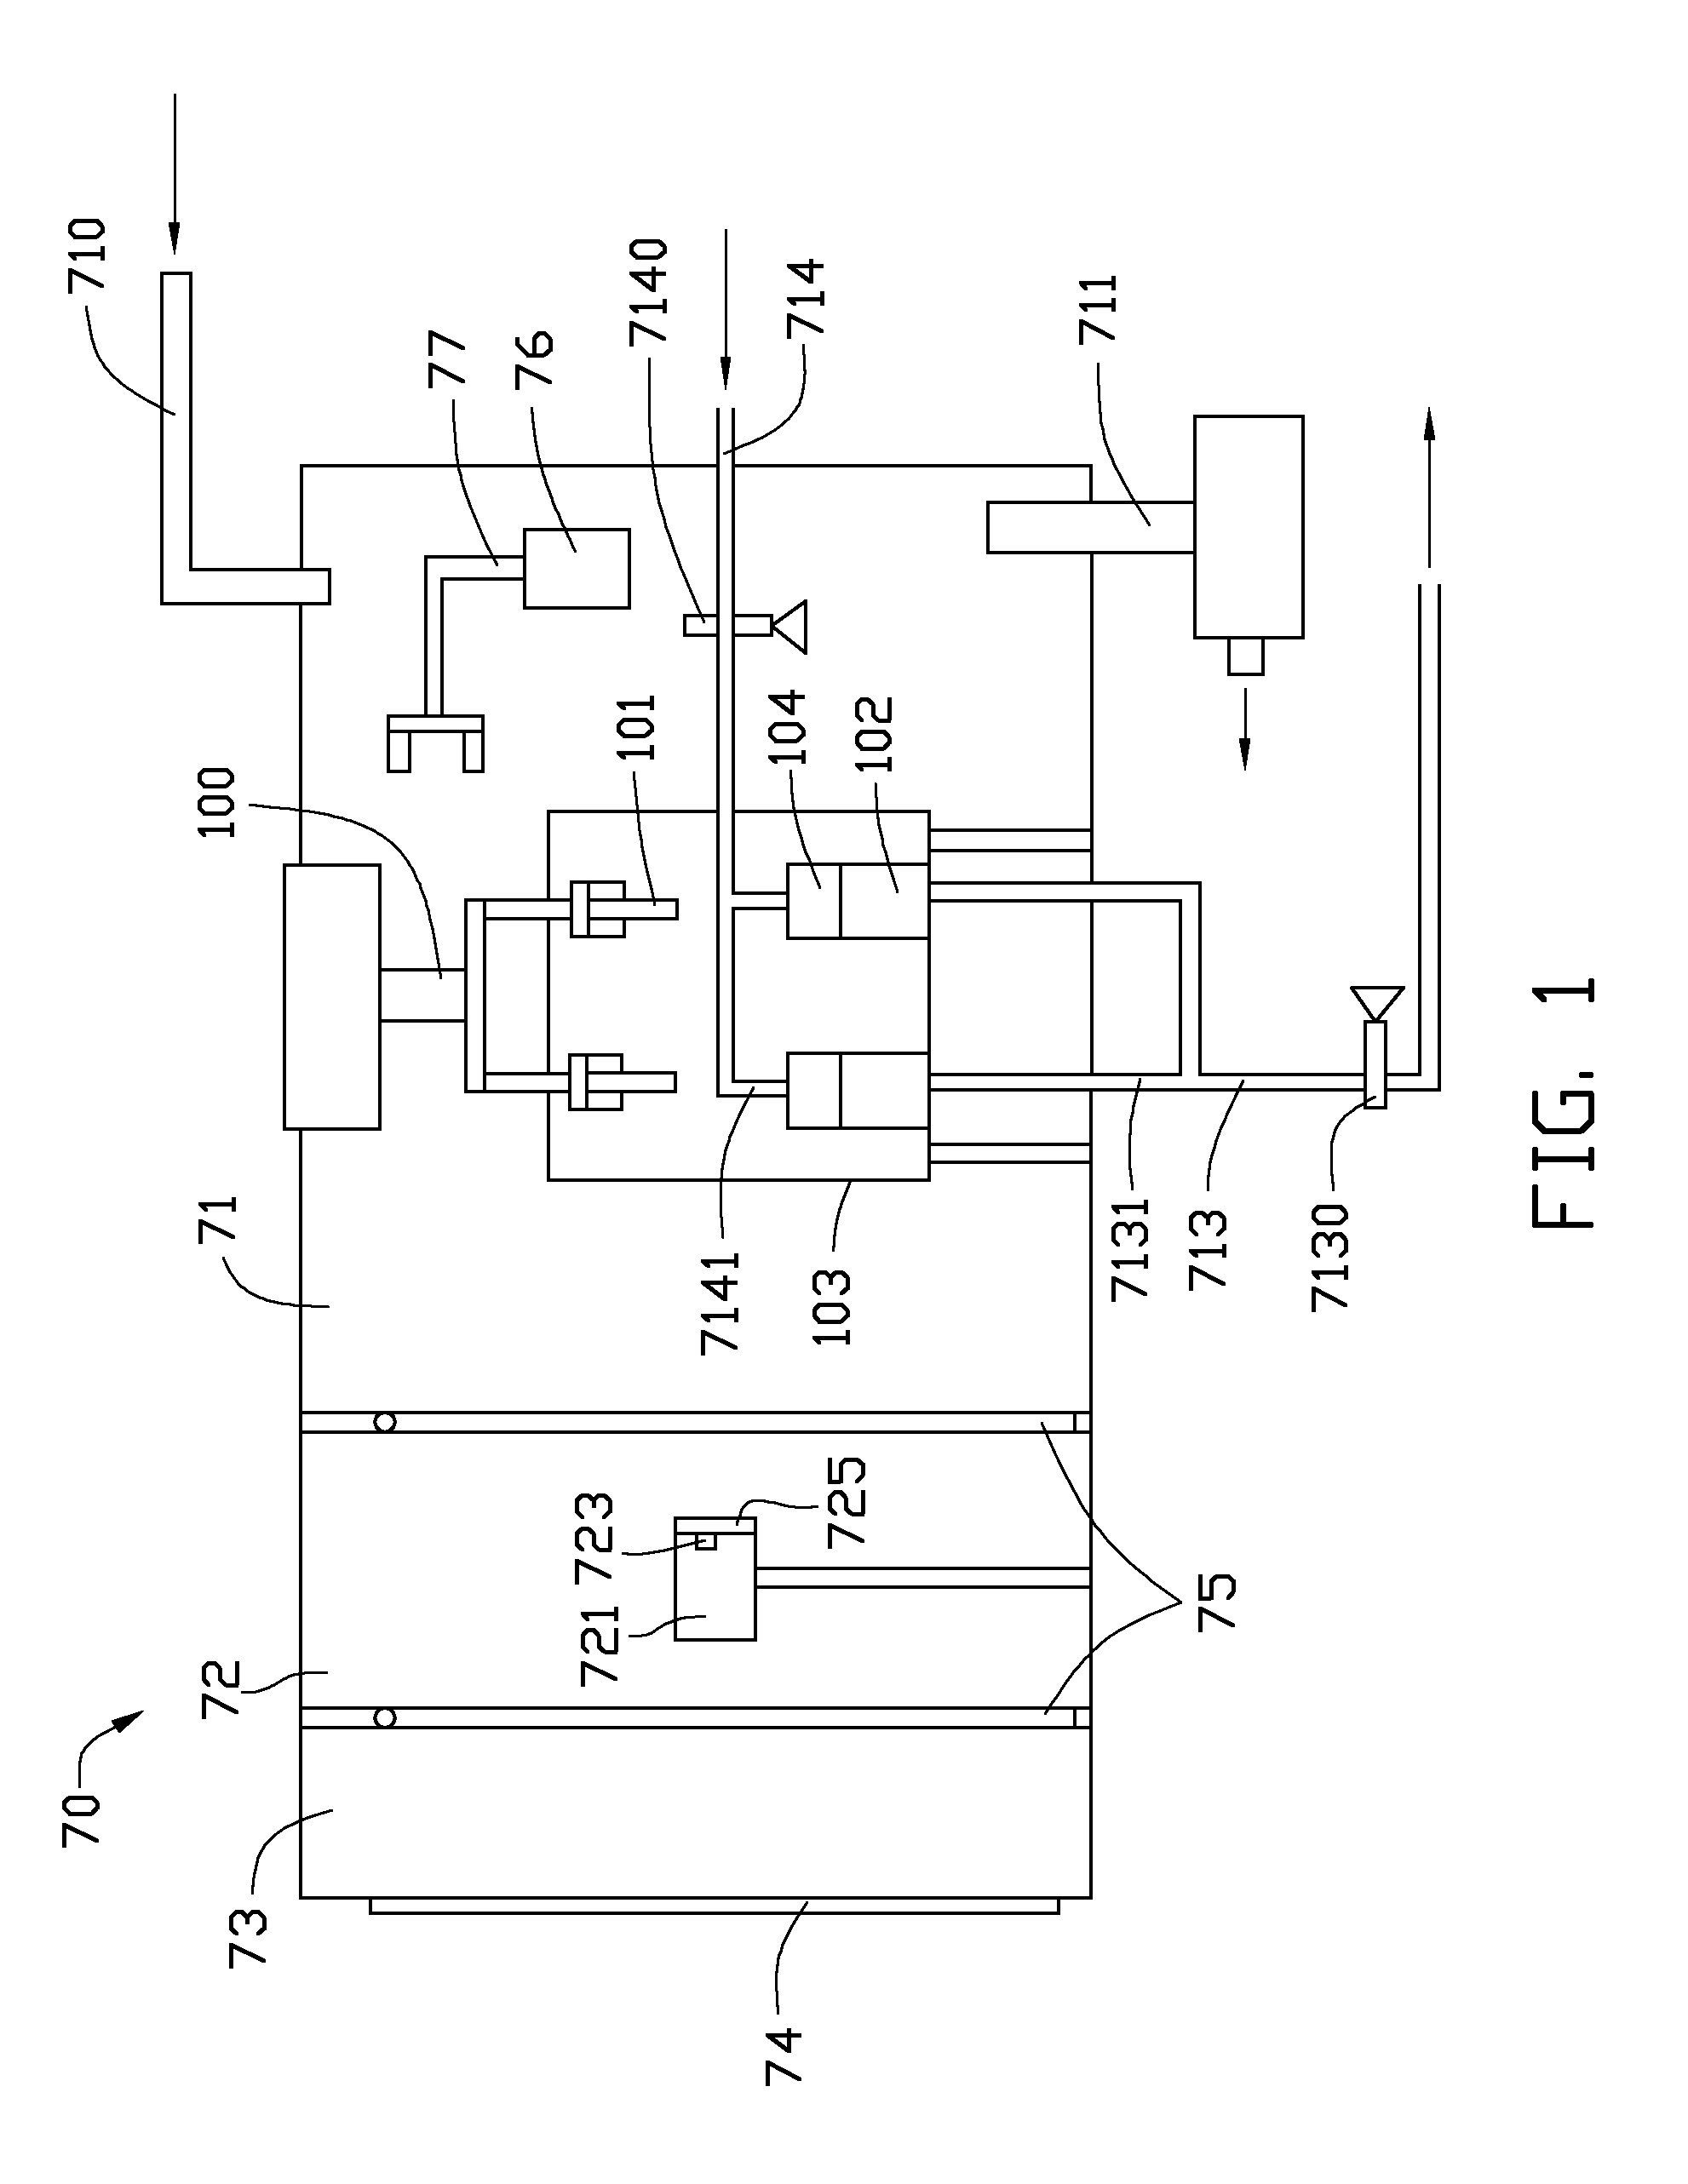 Wet coating system having annealing chamber